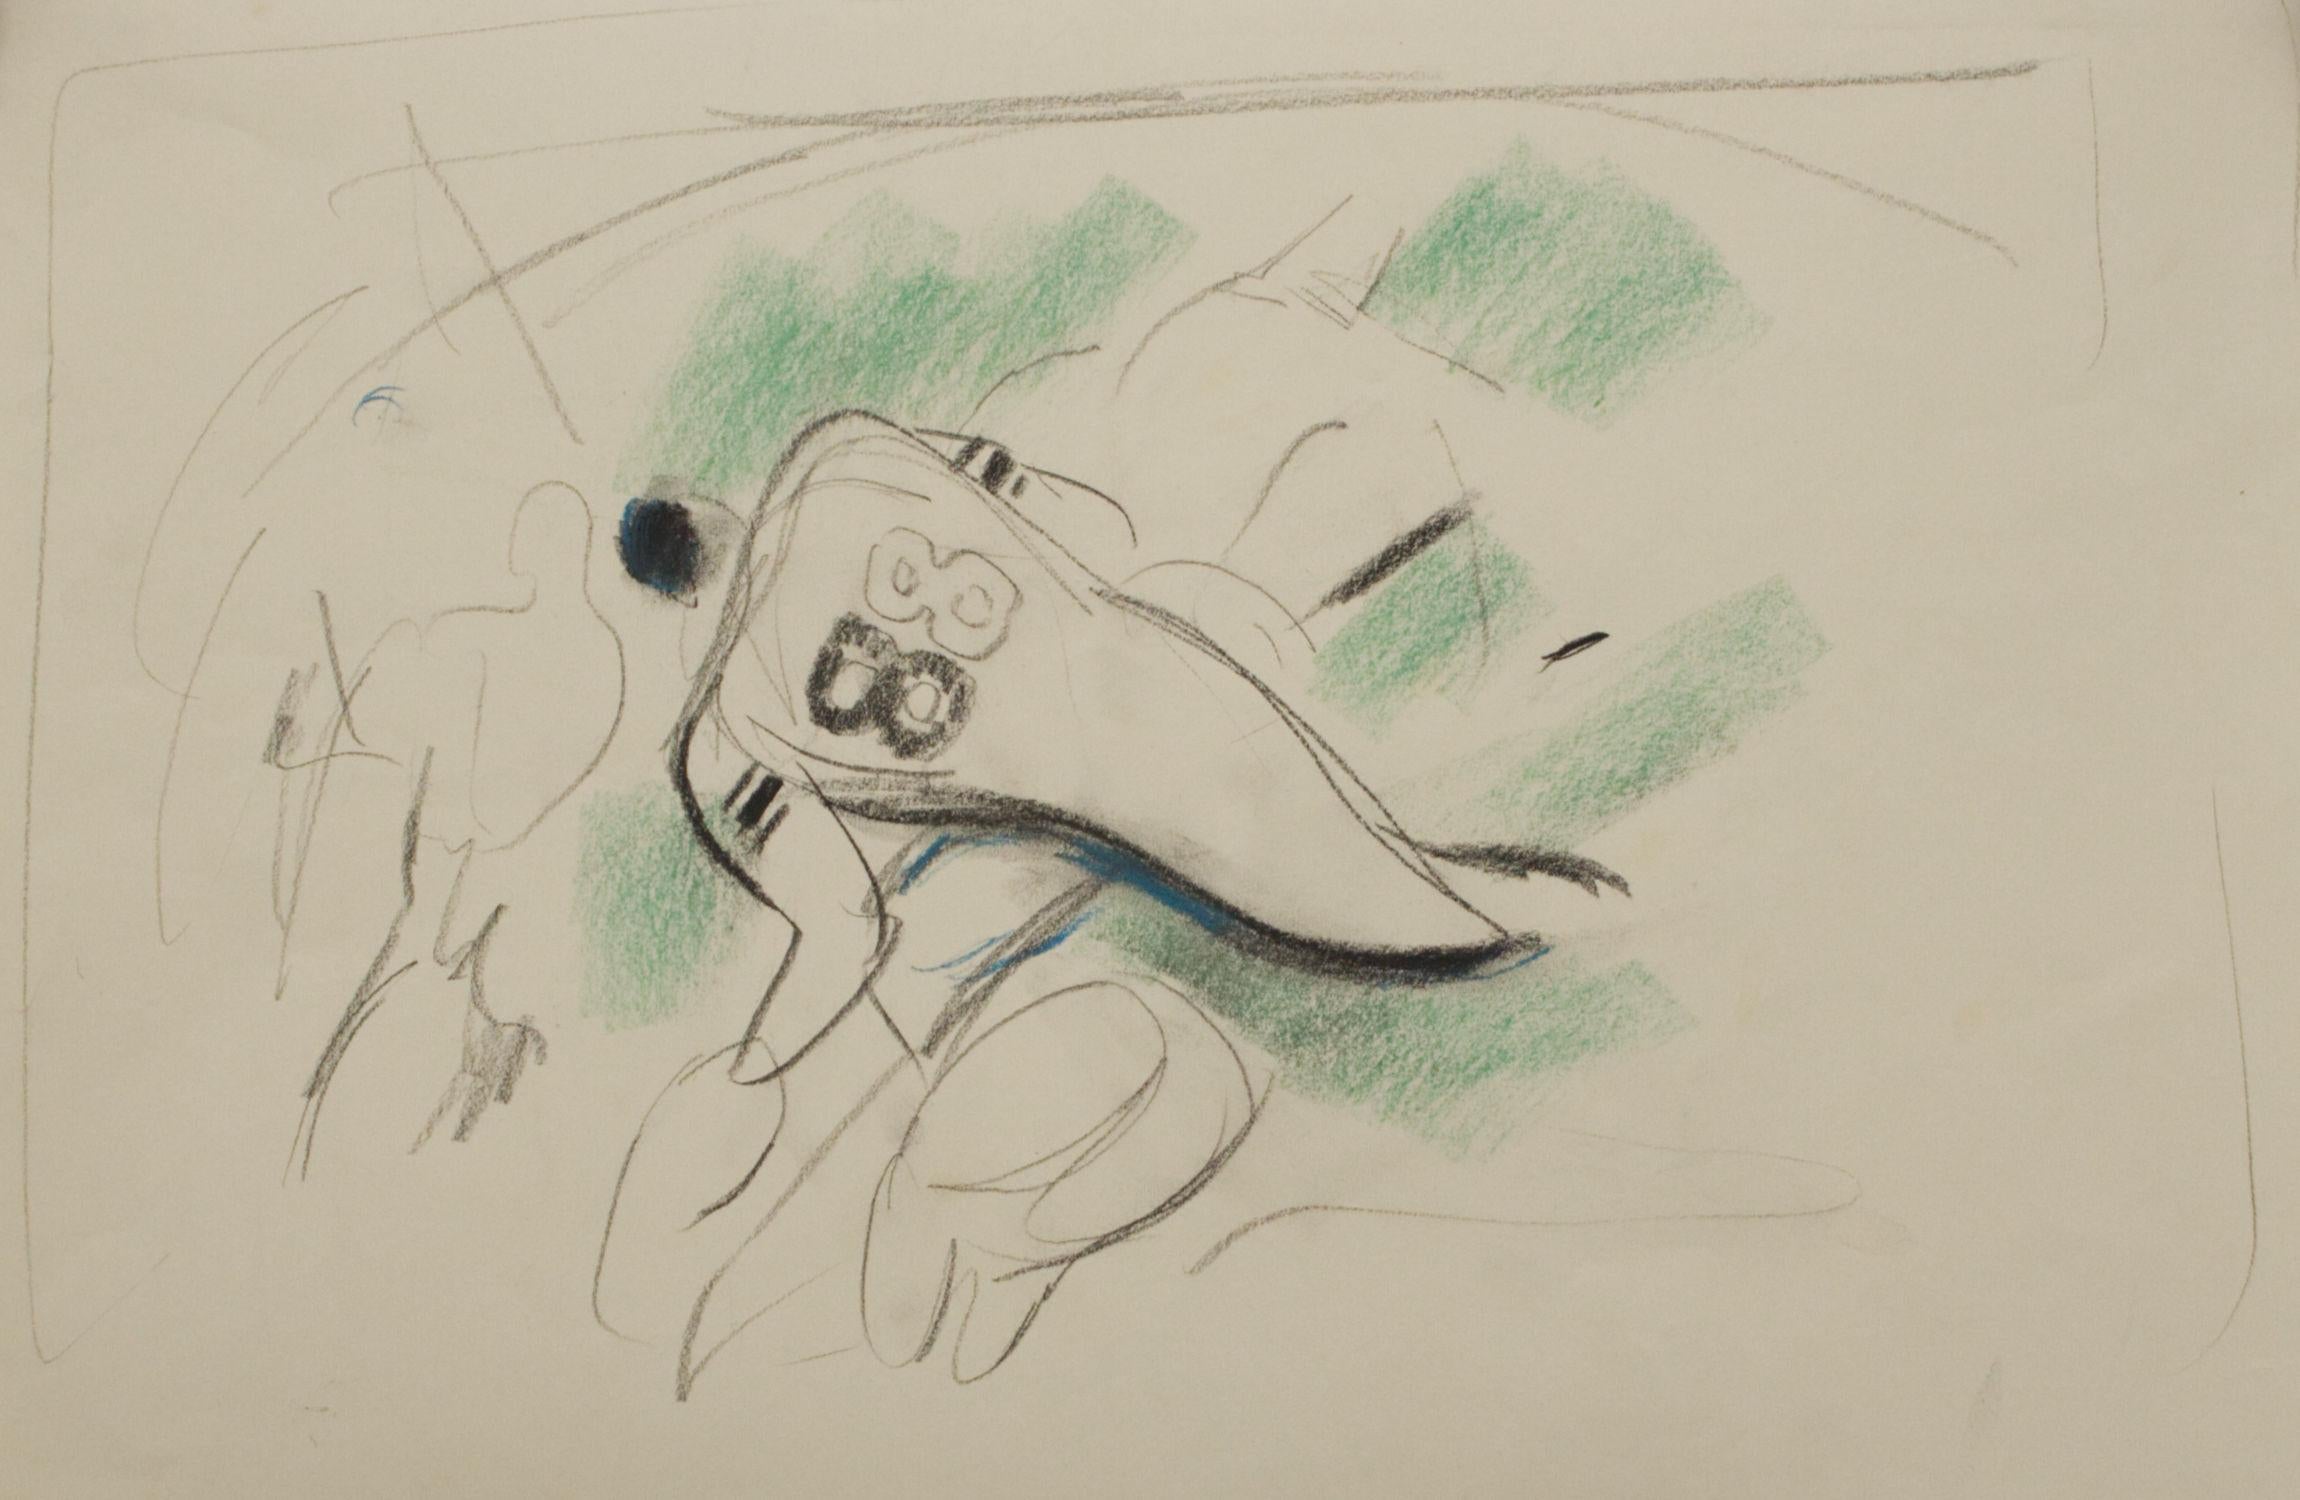 A ca. 1954 pastel & charcoal on paper drawing of a Notre Dame football game by artist Francis Chapin.

Francis Chapin, affectionately called the “Dean of Chicago Painters” by his colleagues, was one of the city’s most popular and celebrated painters